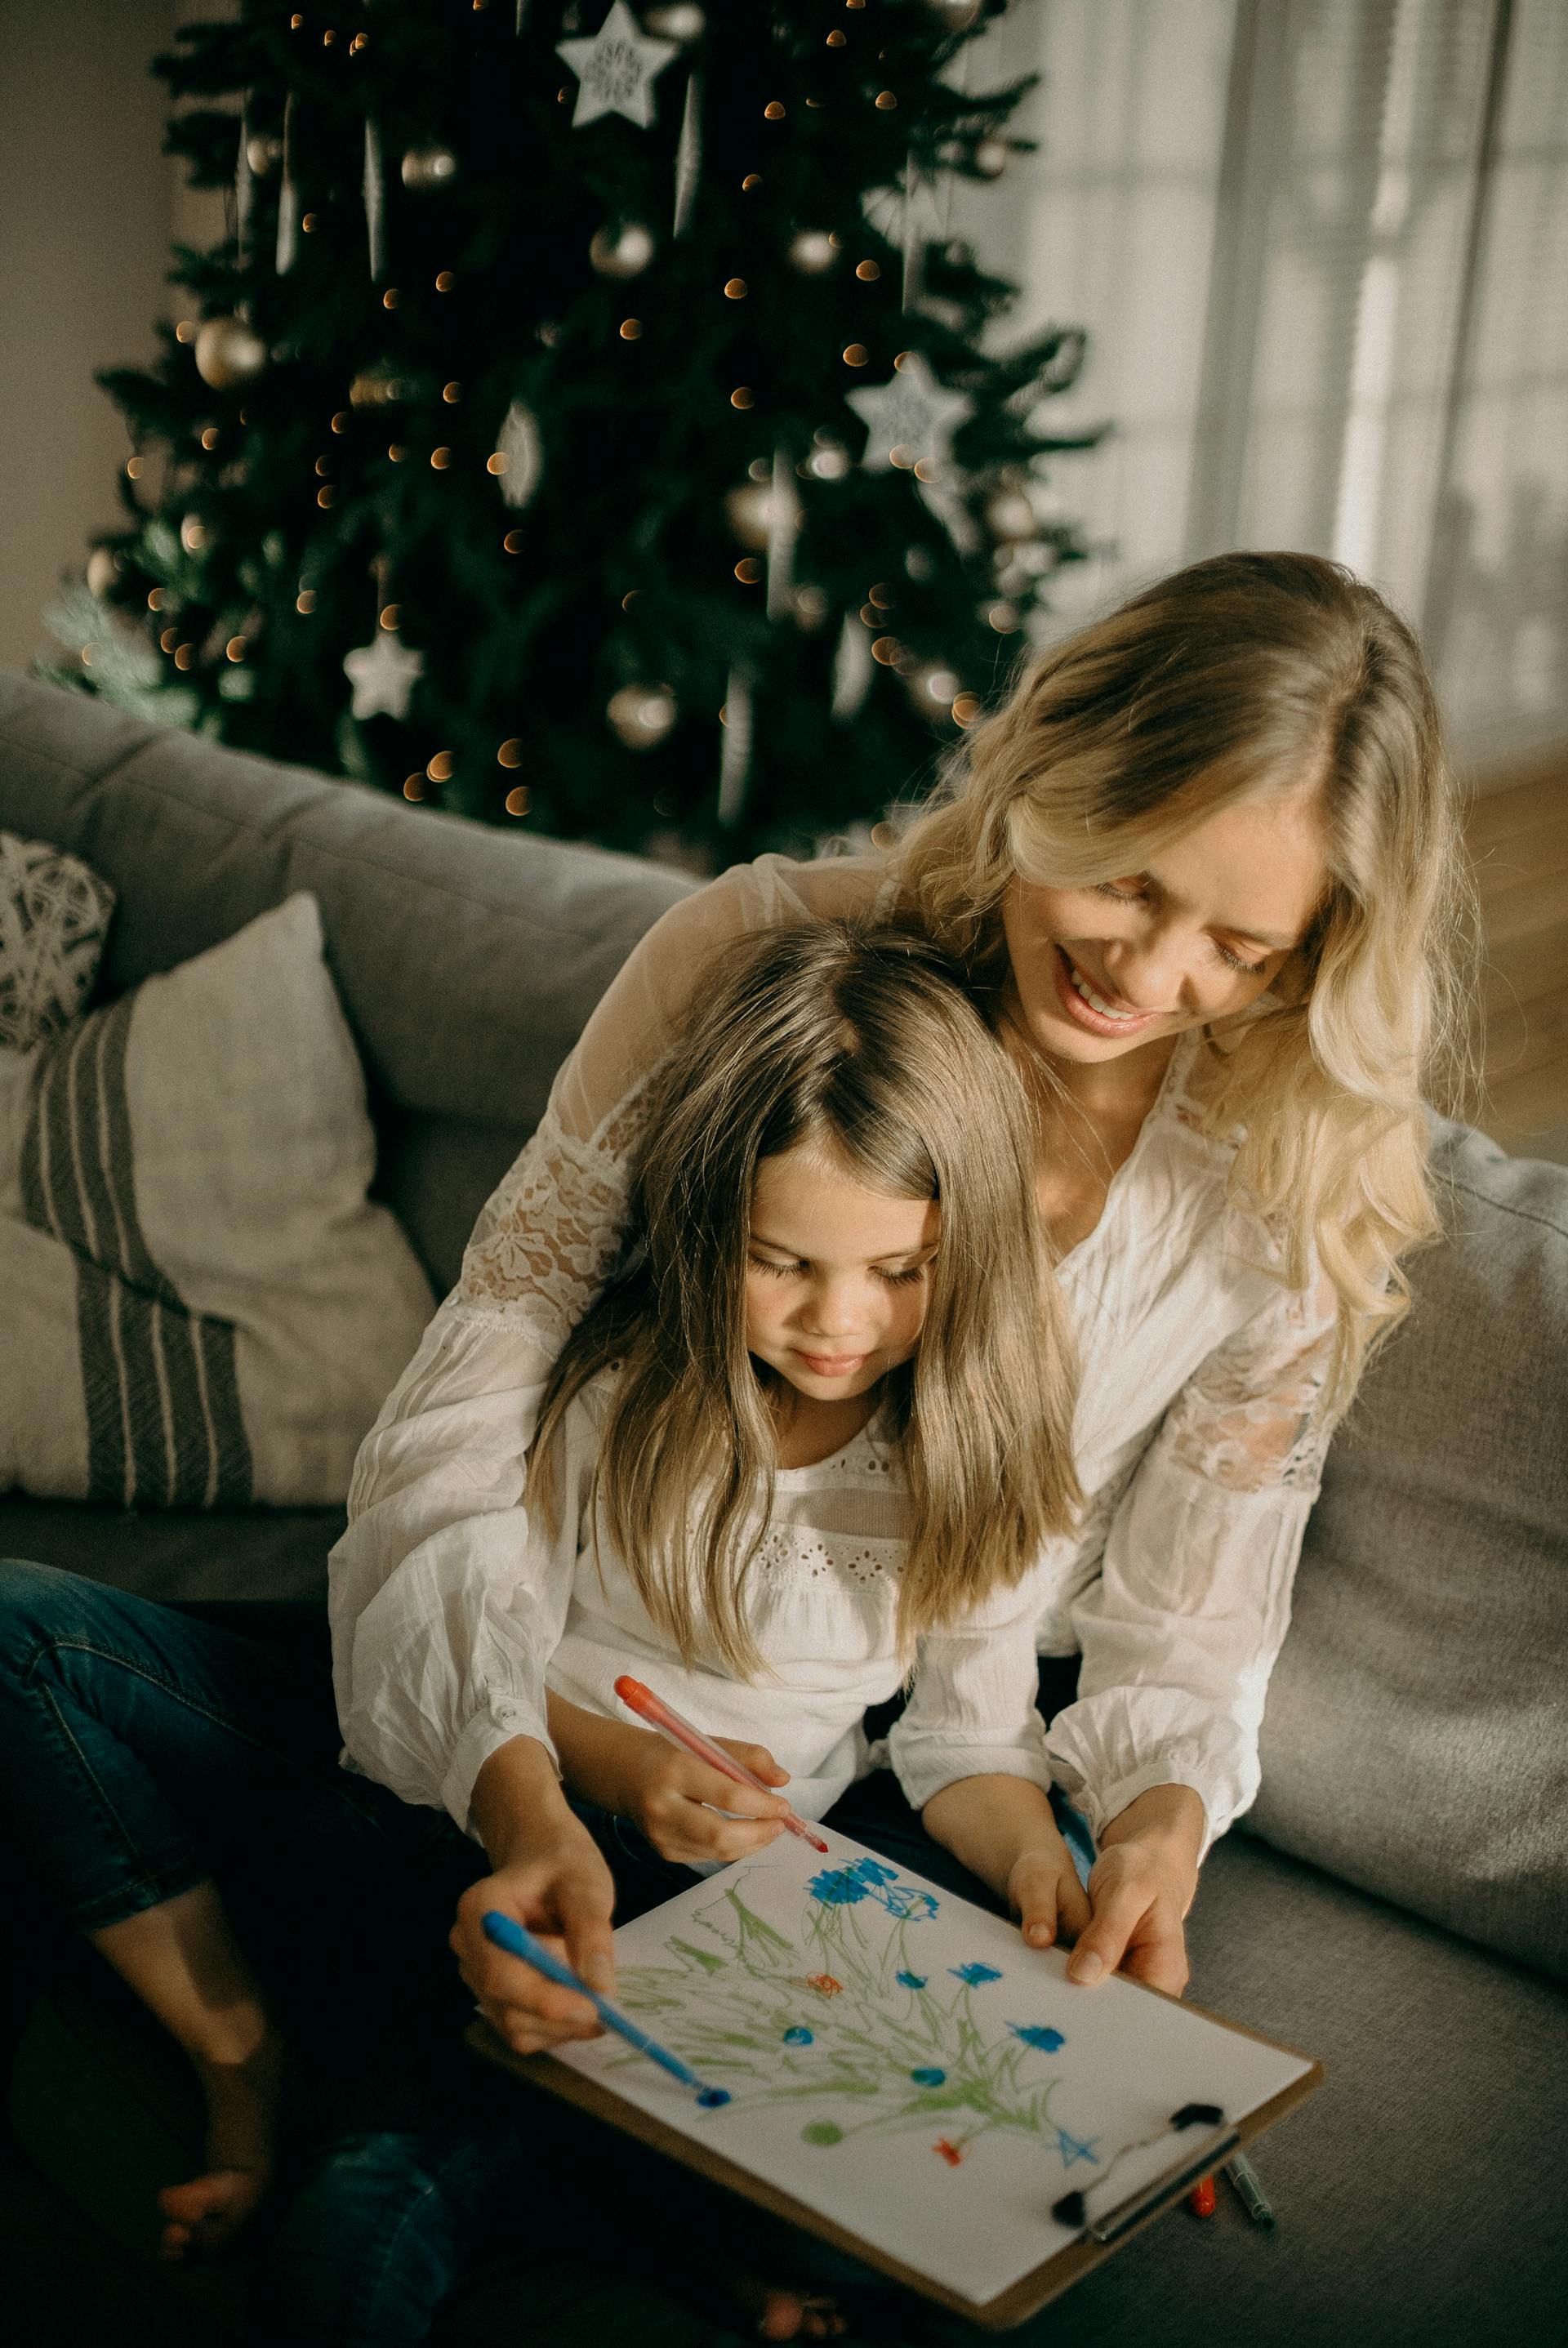 A young mother and daughter | Source: Pexels